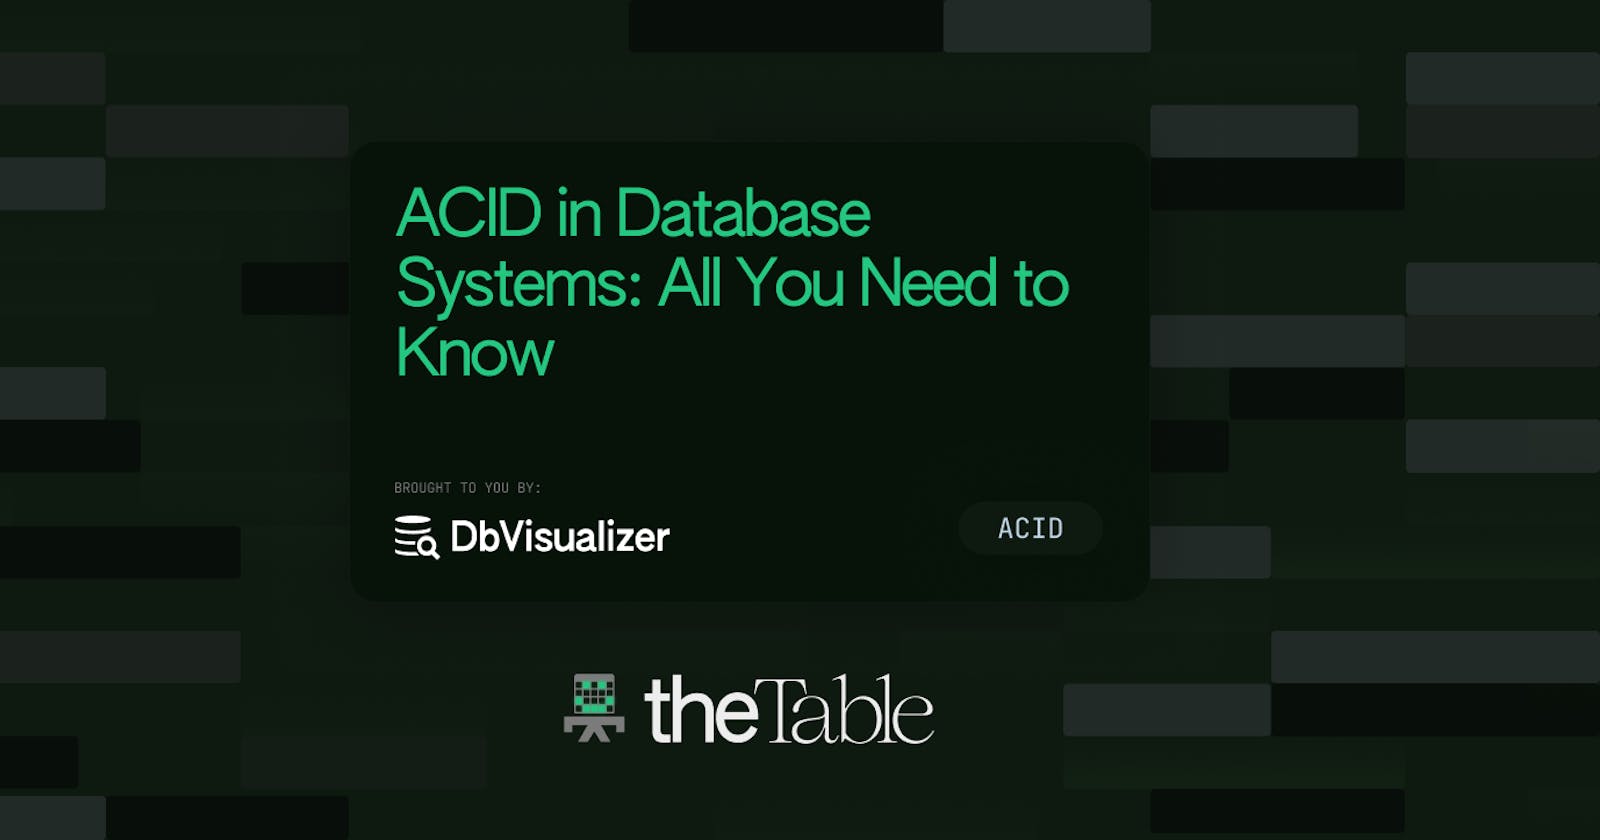 ACID in Database Systems: All You Need to Know